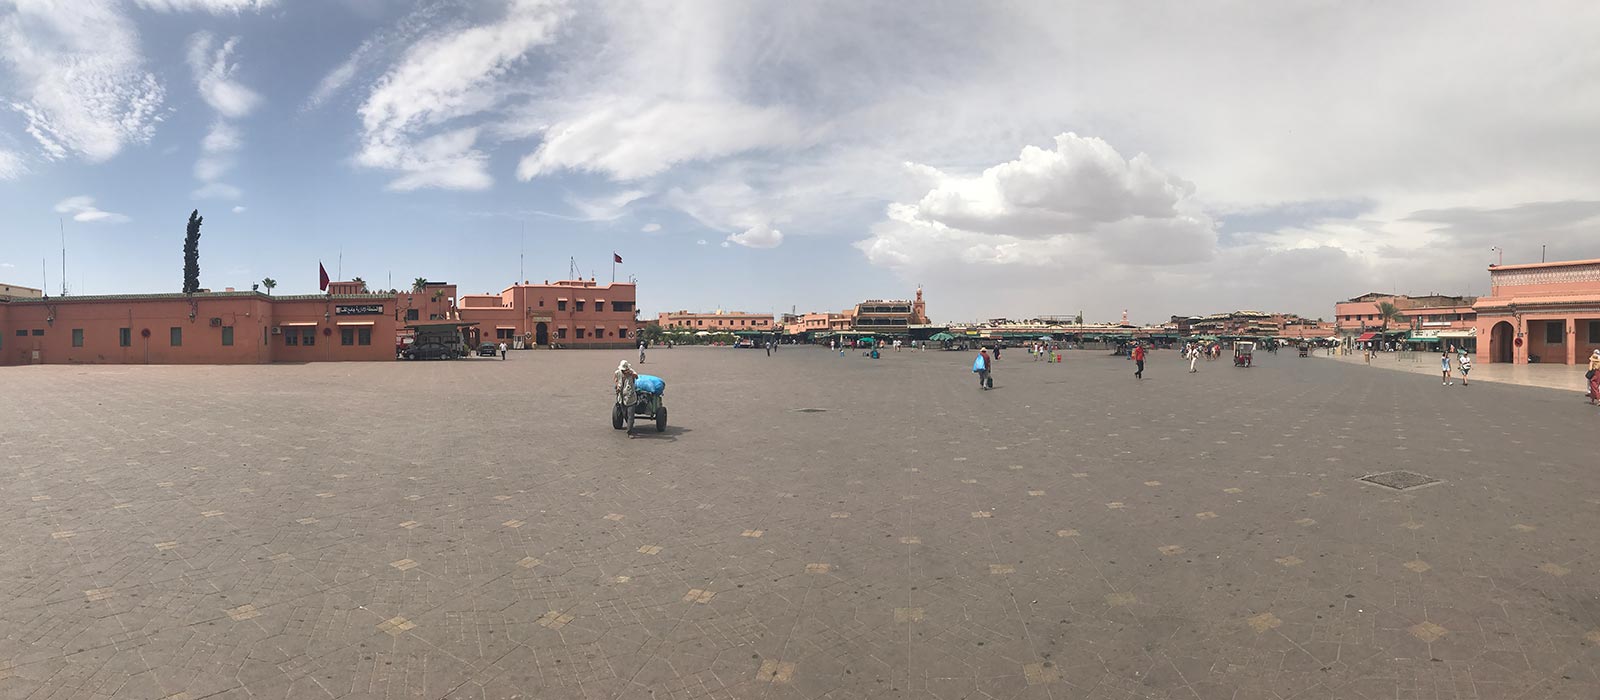 Open spaces in the city of Marrakesh, Morocco. Arriving into Marrakesh